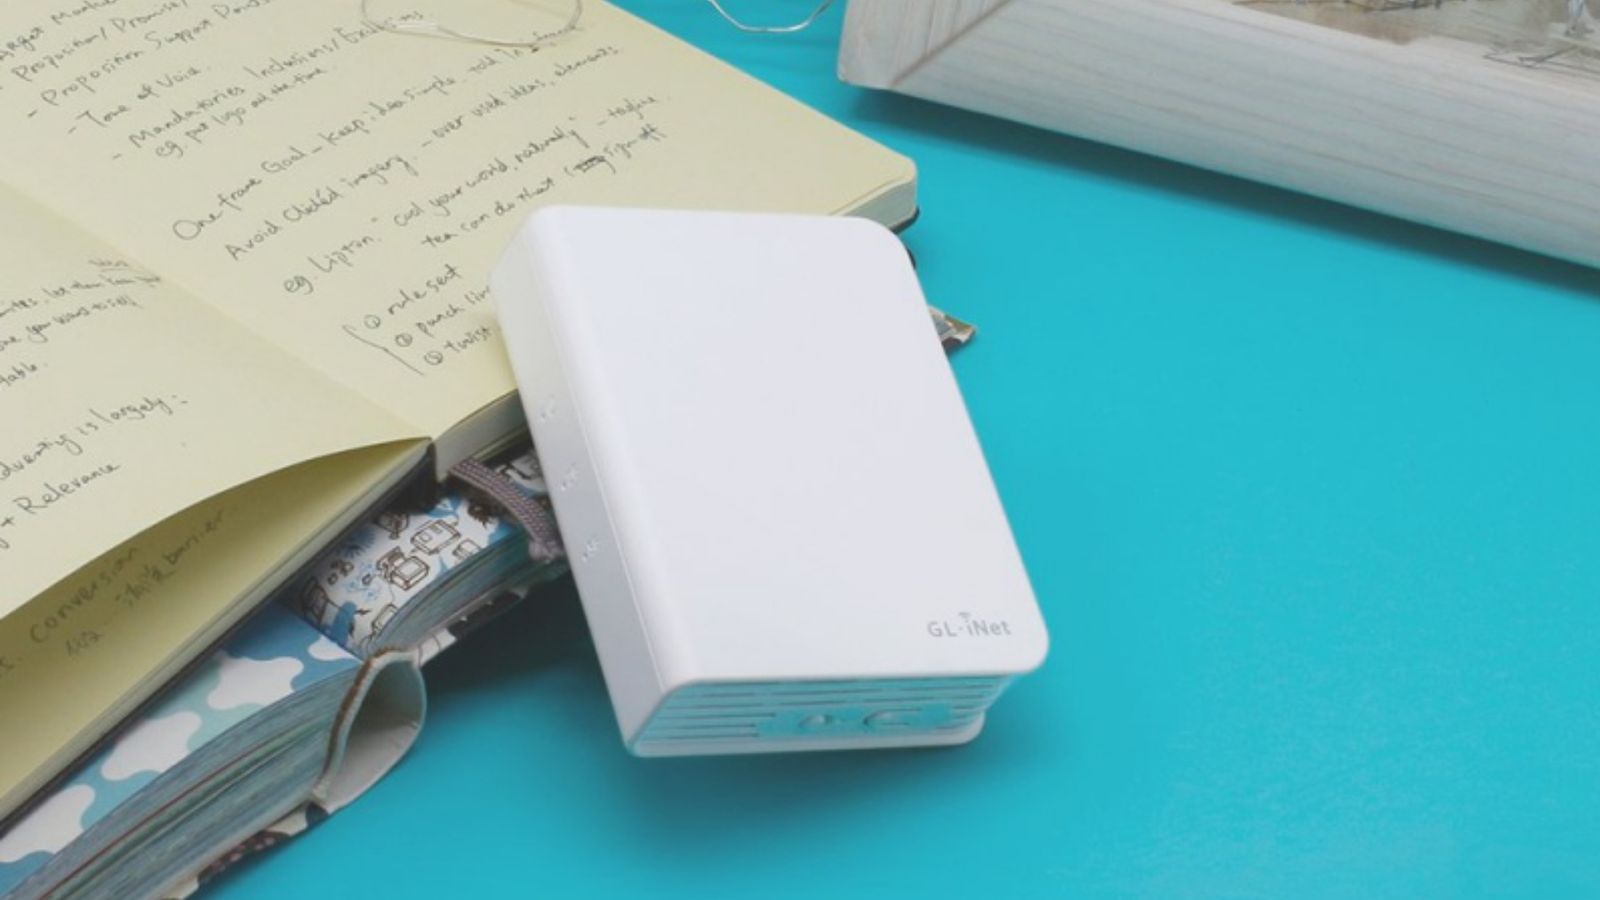 A small white Wi-Fi router resting against a book.